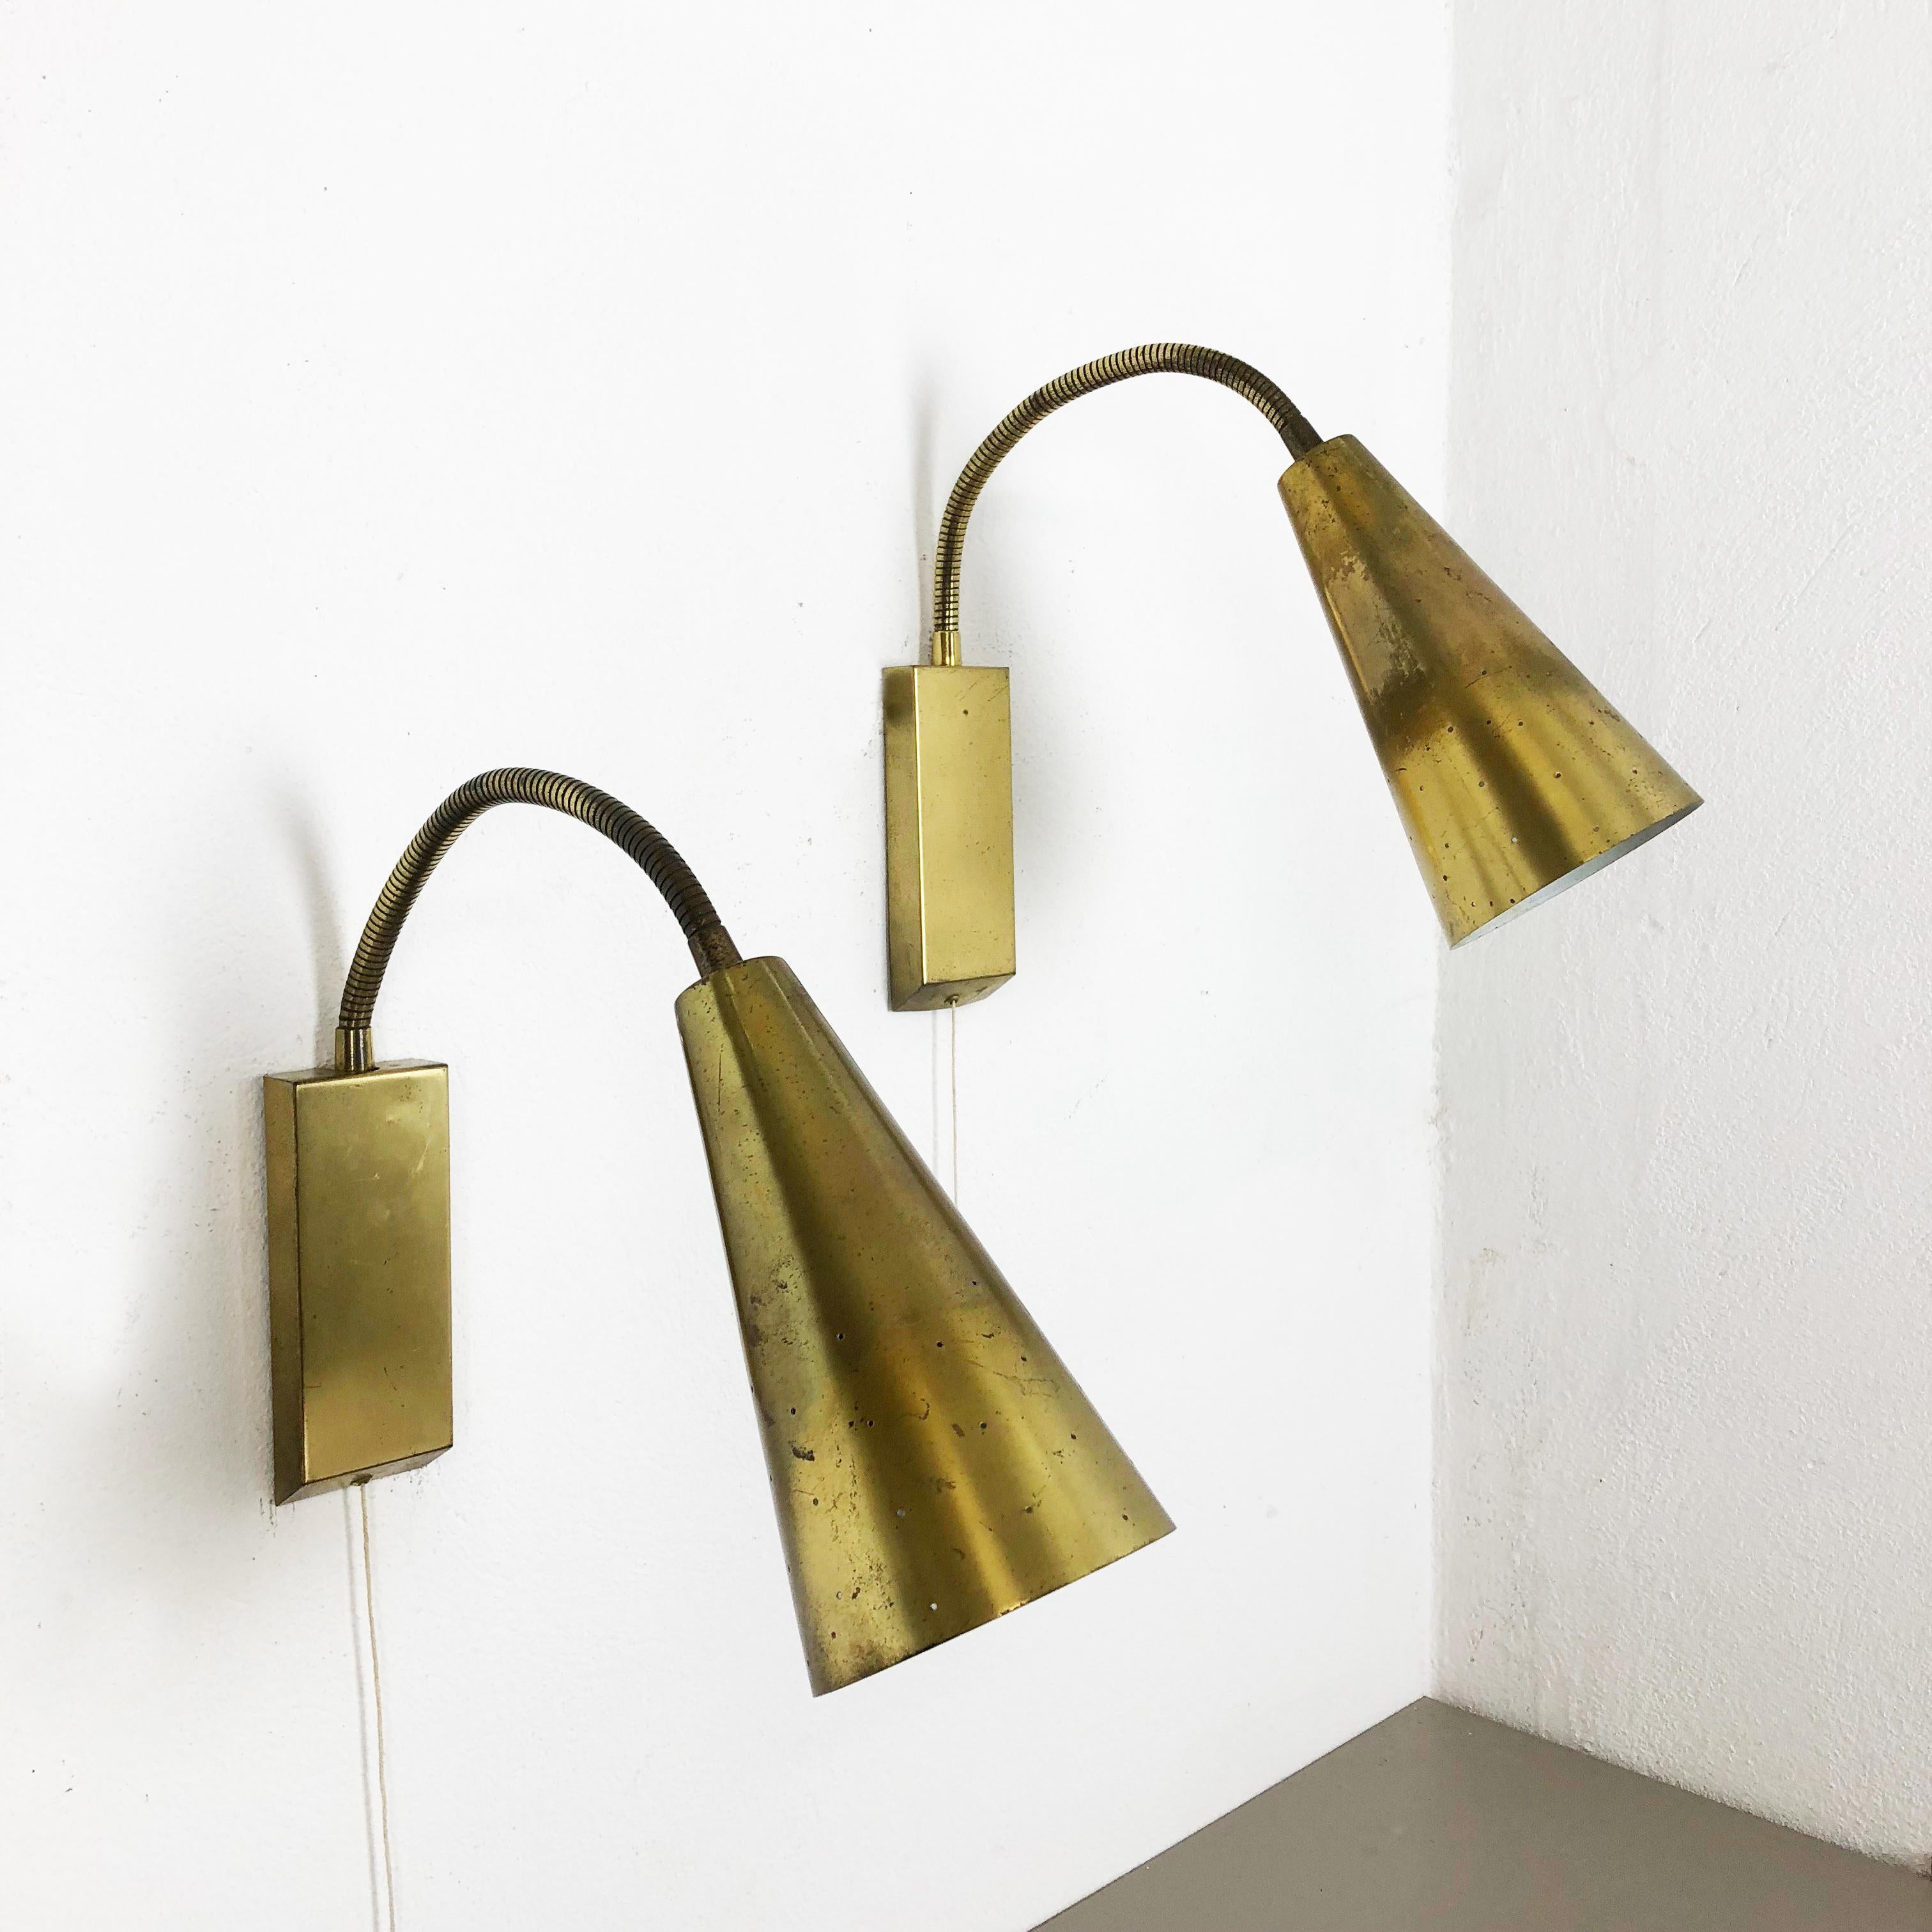 Italian Set of Two Modernist Stilnovo Style Brass Metal Sconces Wall Light, Italy, 1950 For Sale